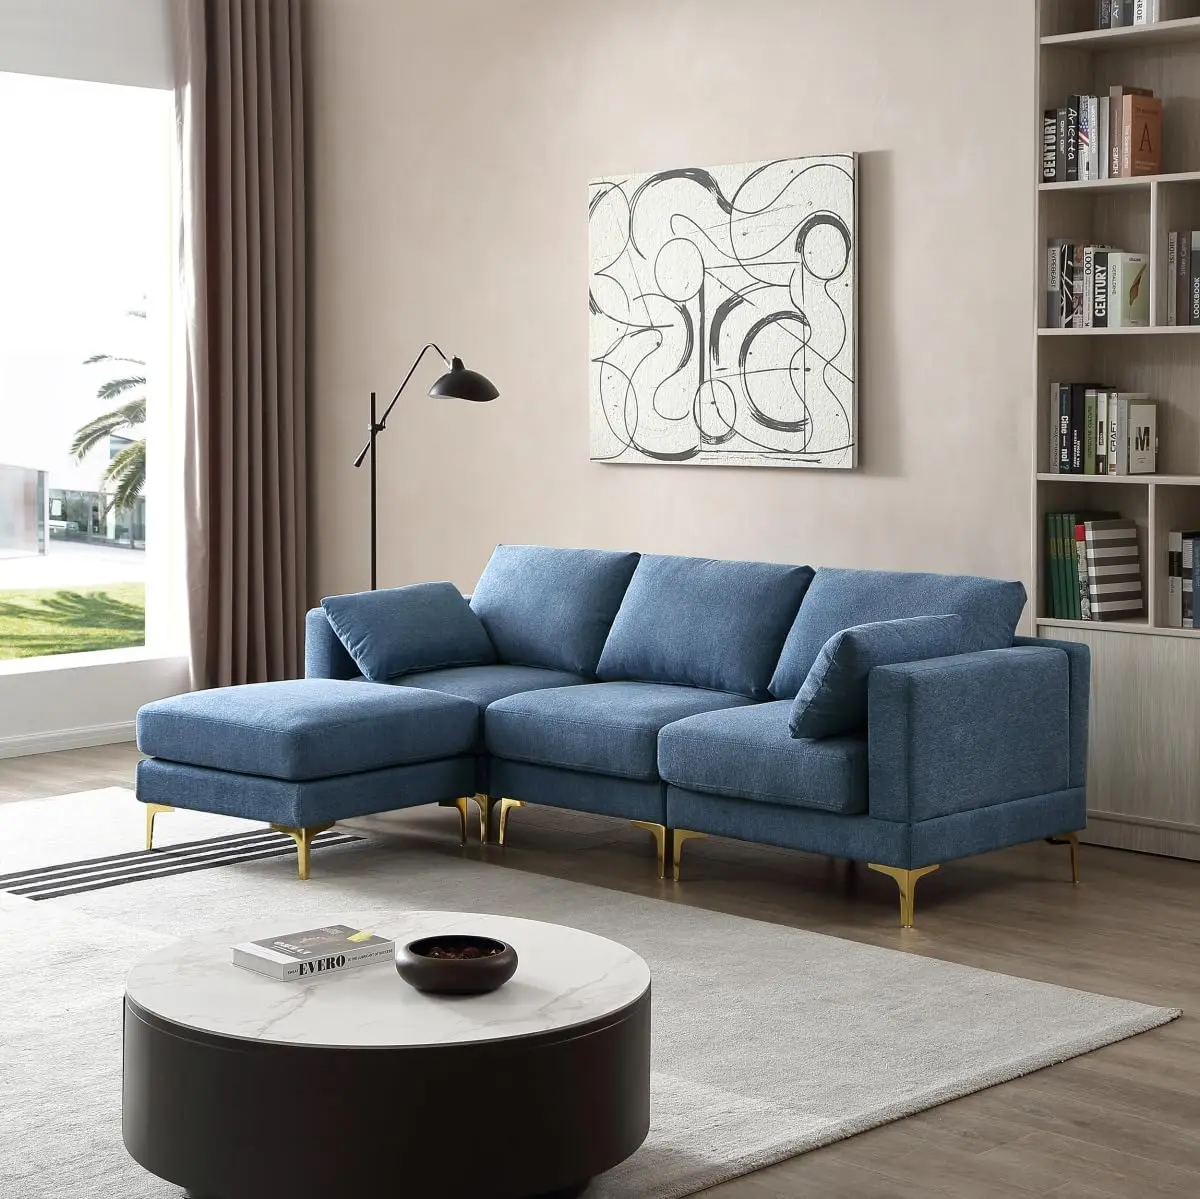 

Blue Color 3-Piece Modular Sofa with Footrest,Sectional Couch Convertible to 3-Seater or Armchair,Golden Legs and 2 Pillows New